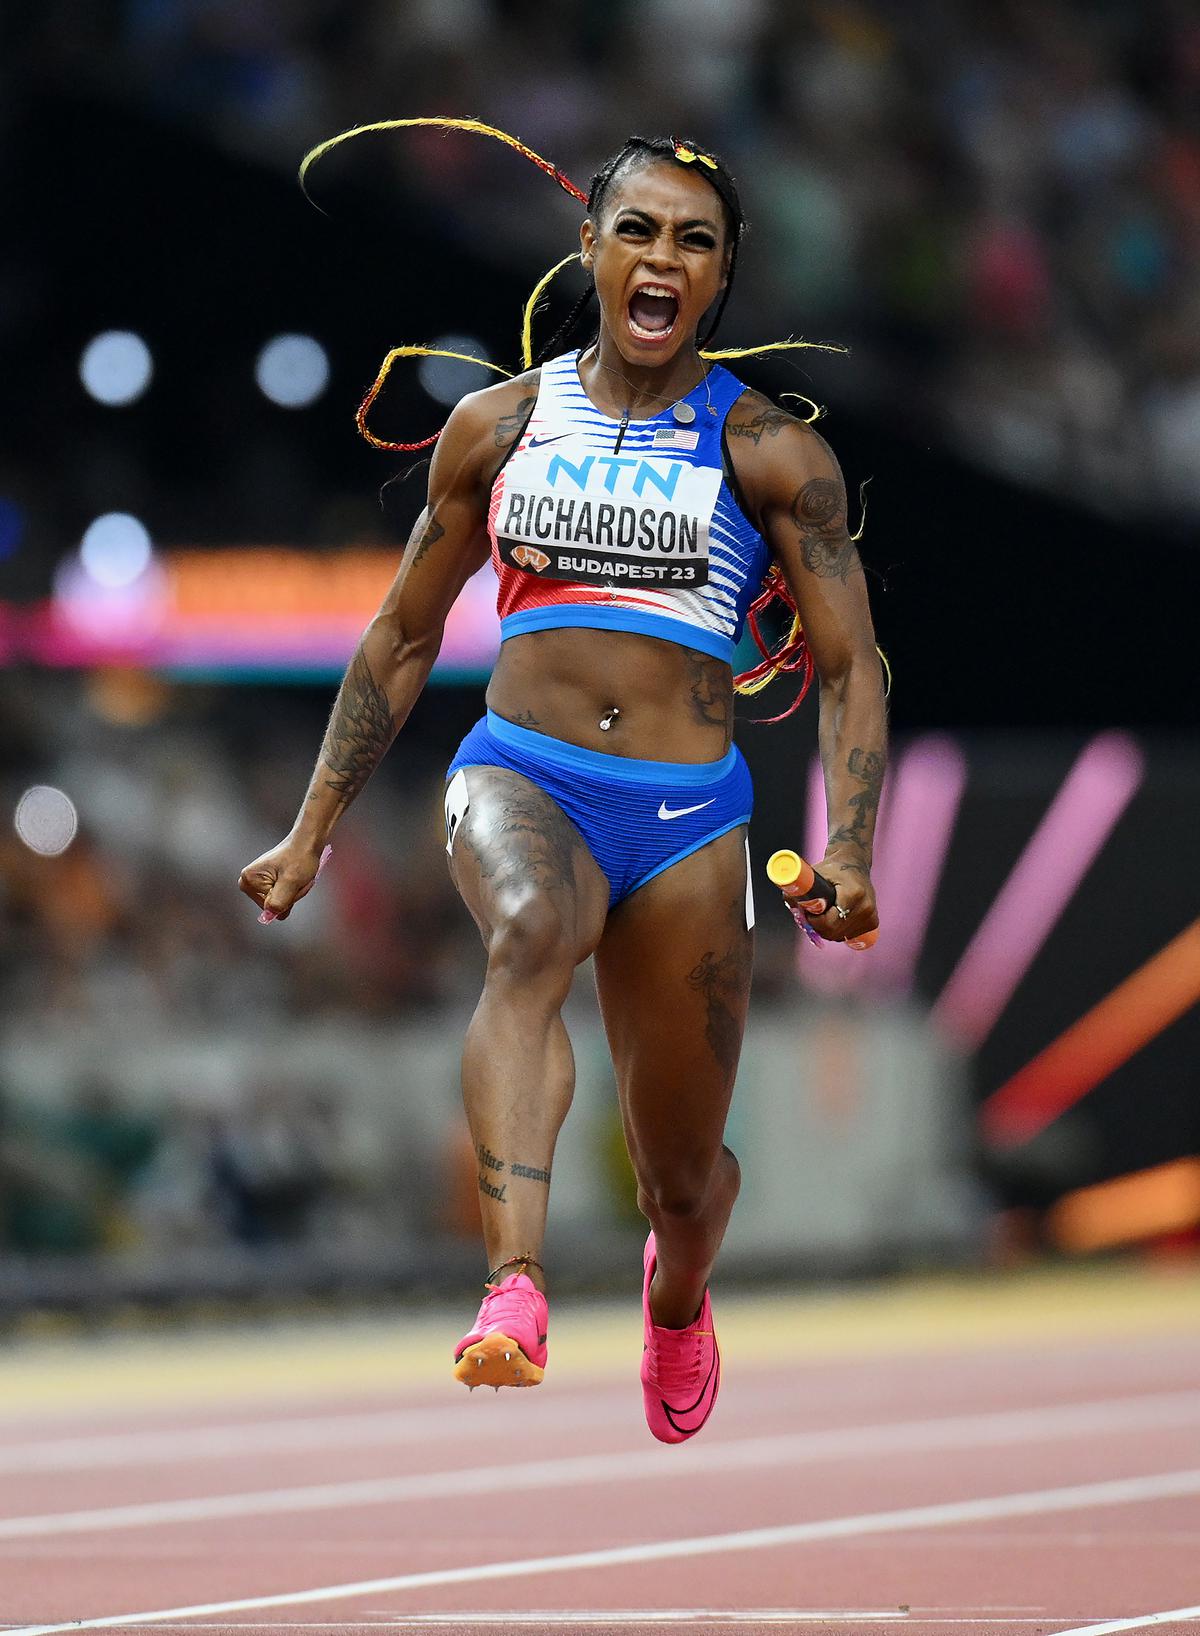 Star power: Richardson’s dynamic style and forthright personality make her one of the world’s most watchable athletes. | Photo credit: Getty Image